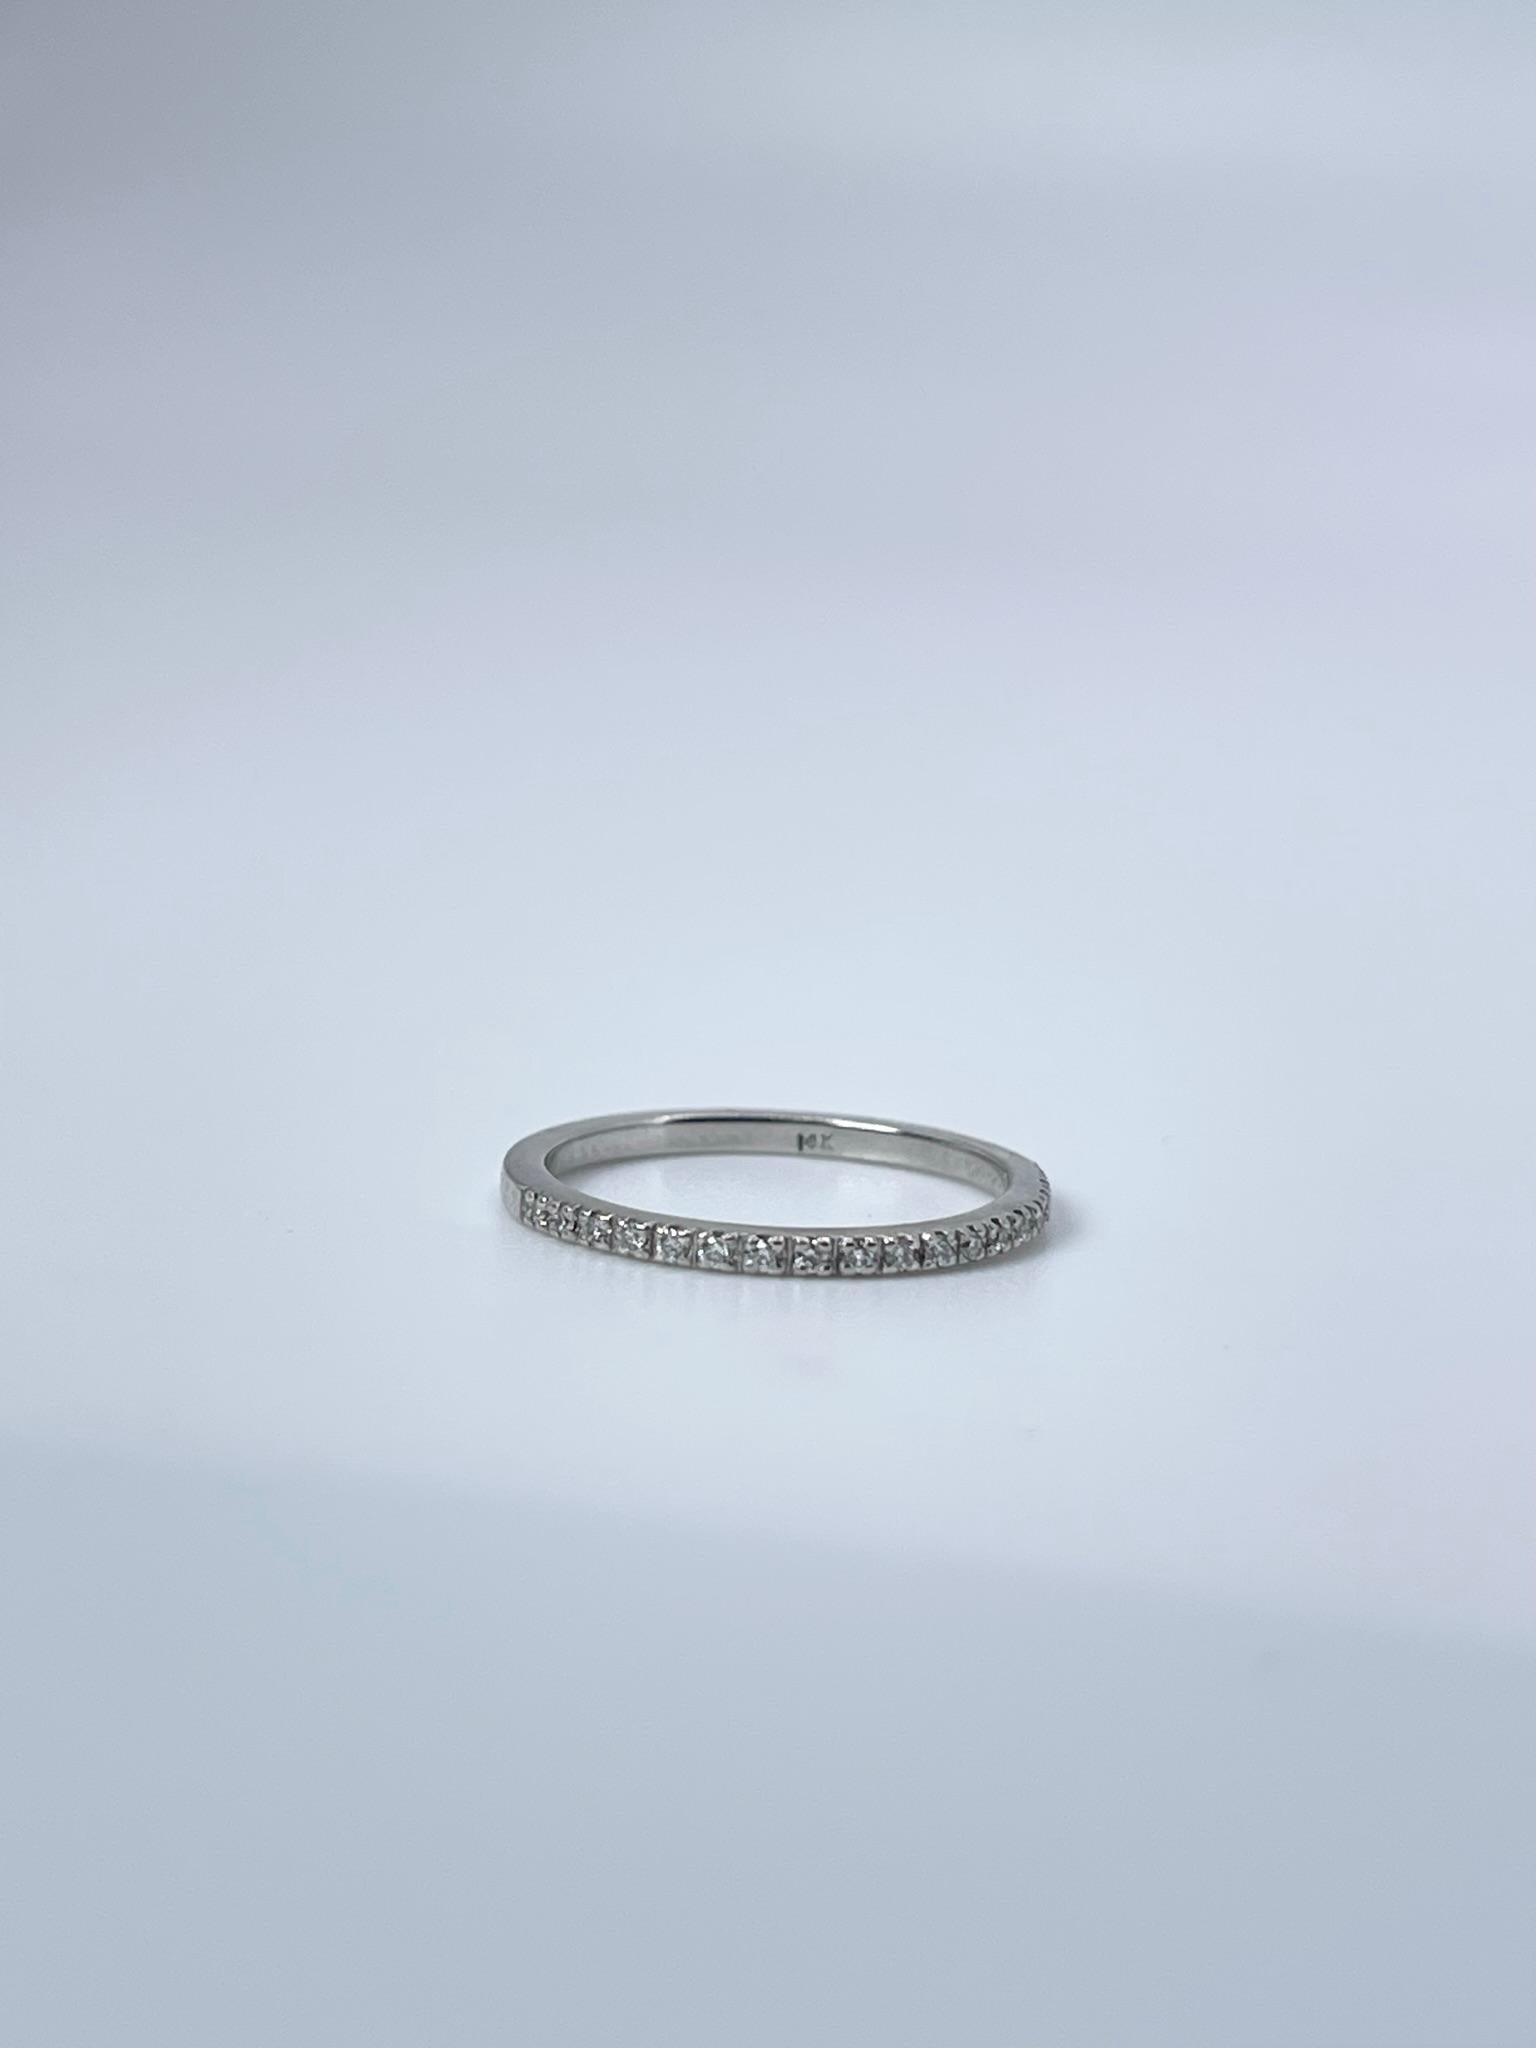 Micro Pave ring in 14KT white gold with natural round brilliant diamonds.
ITEM#: RF 110-00040
GRAM WEIGHT: 1.22gr
METAL: 14KT

NATURAL DIAMOND(S)
Cut: Round Brilliant
Color: G
Clarity: SI 
Carat: 0.11ct
Size: 5 ( can be re-sized)


WHAT YOU GET AT